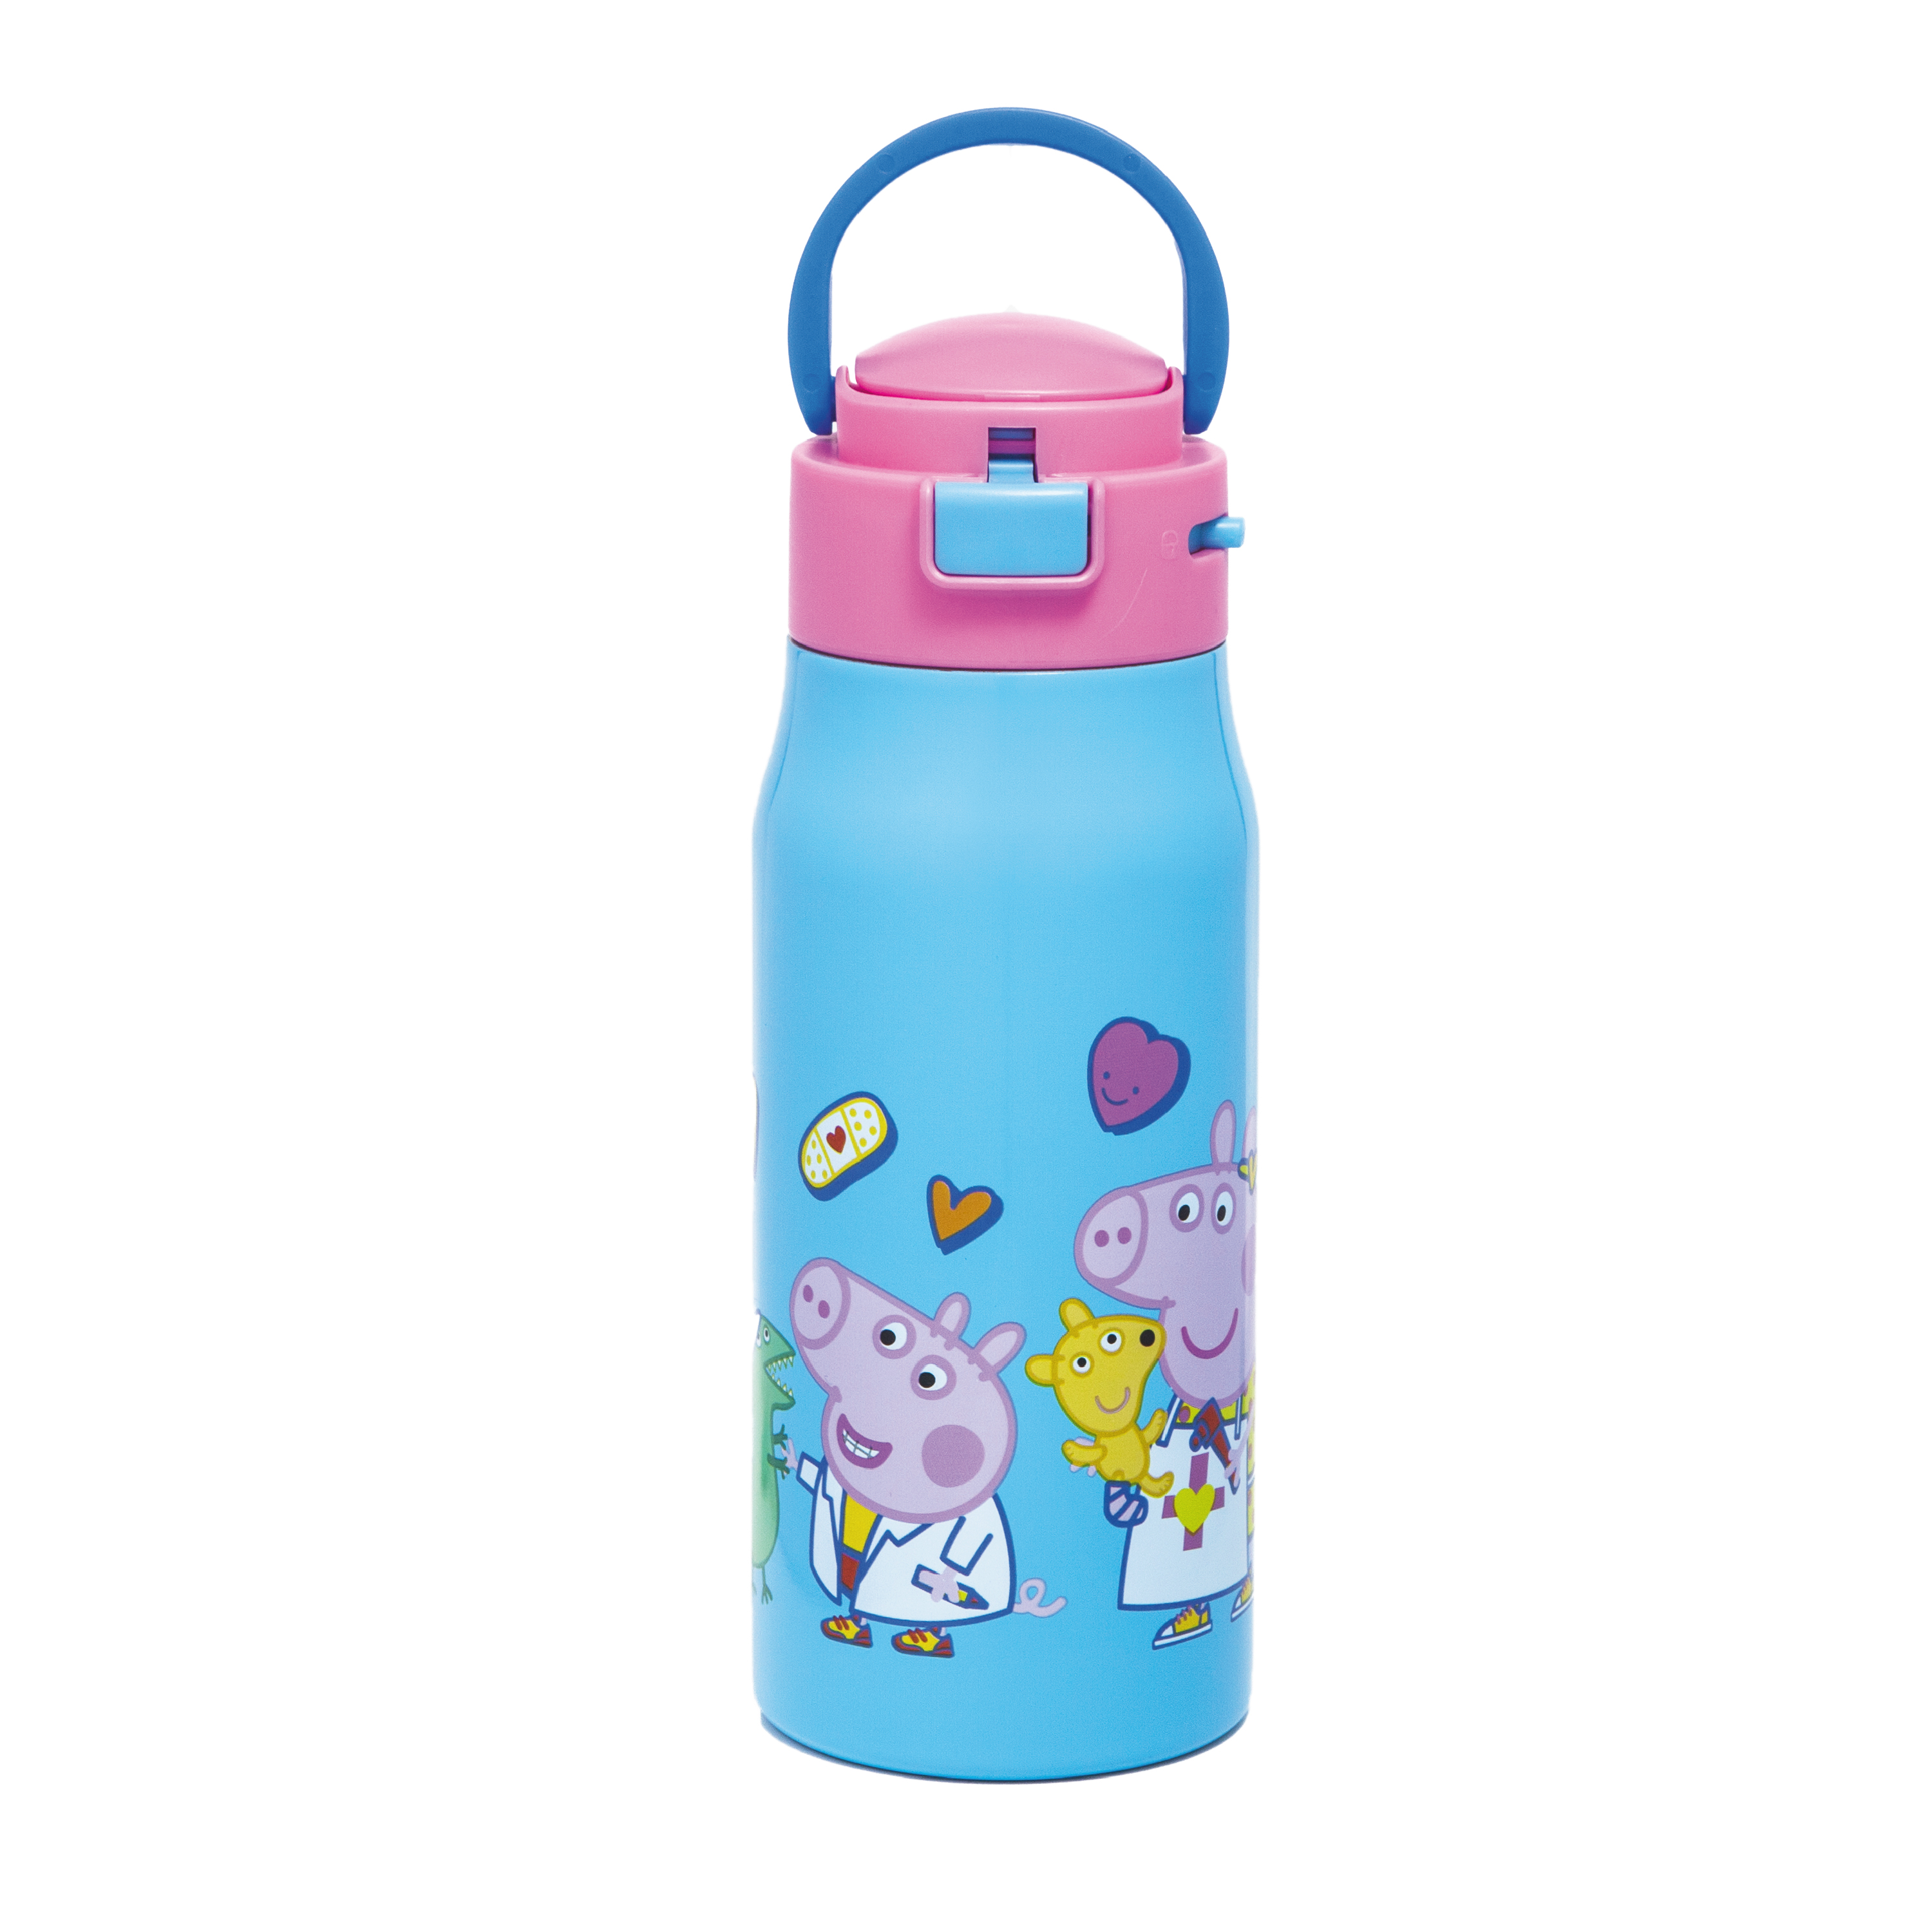 Peppa Pig 13.5 ounce Mesa Double Wall Insulated Stainless Steel Water Bottle, Peppa and Friends slideshow image 3